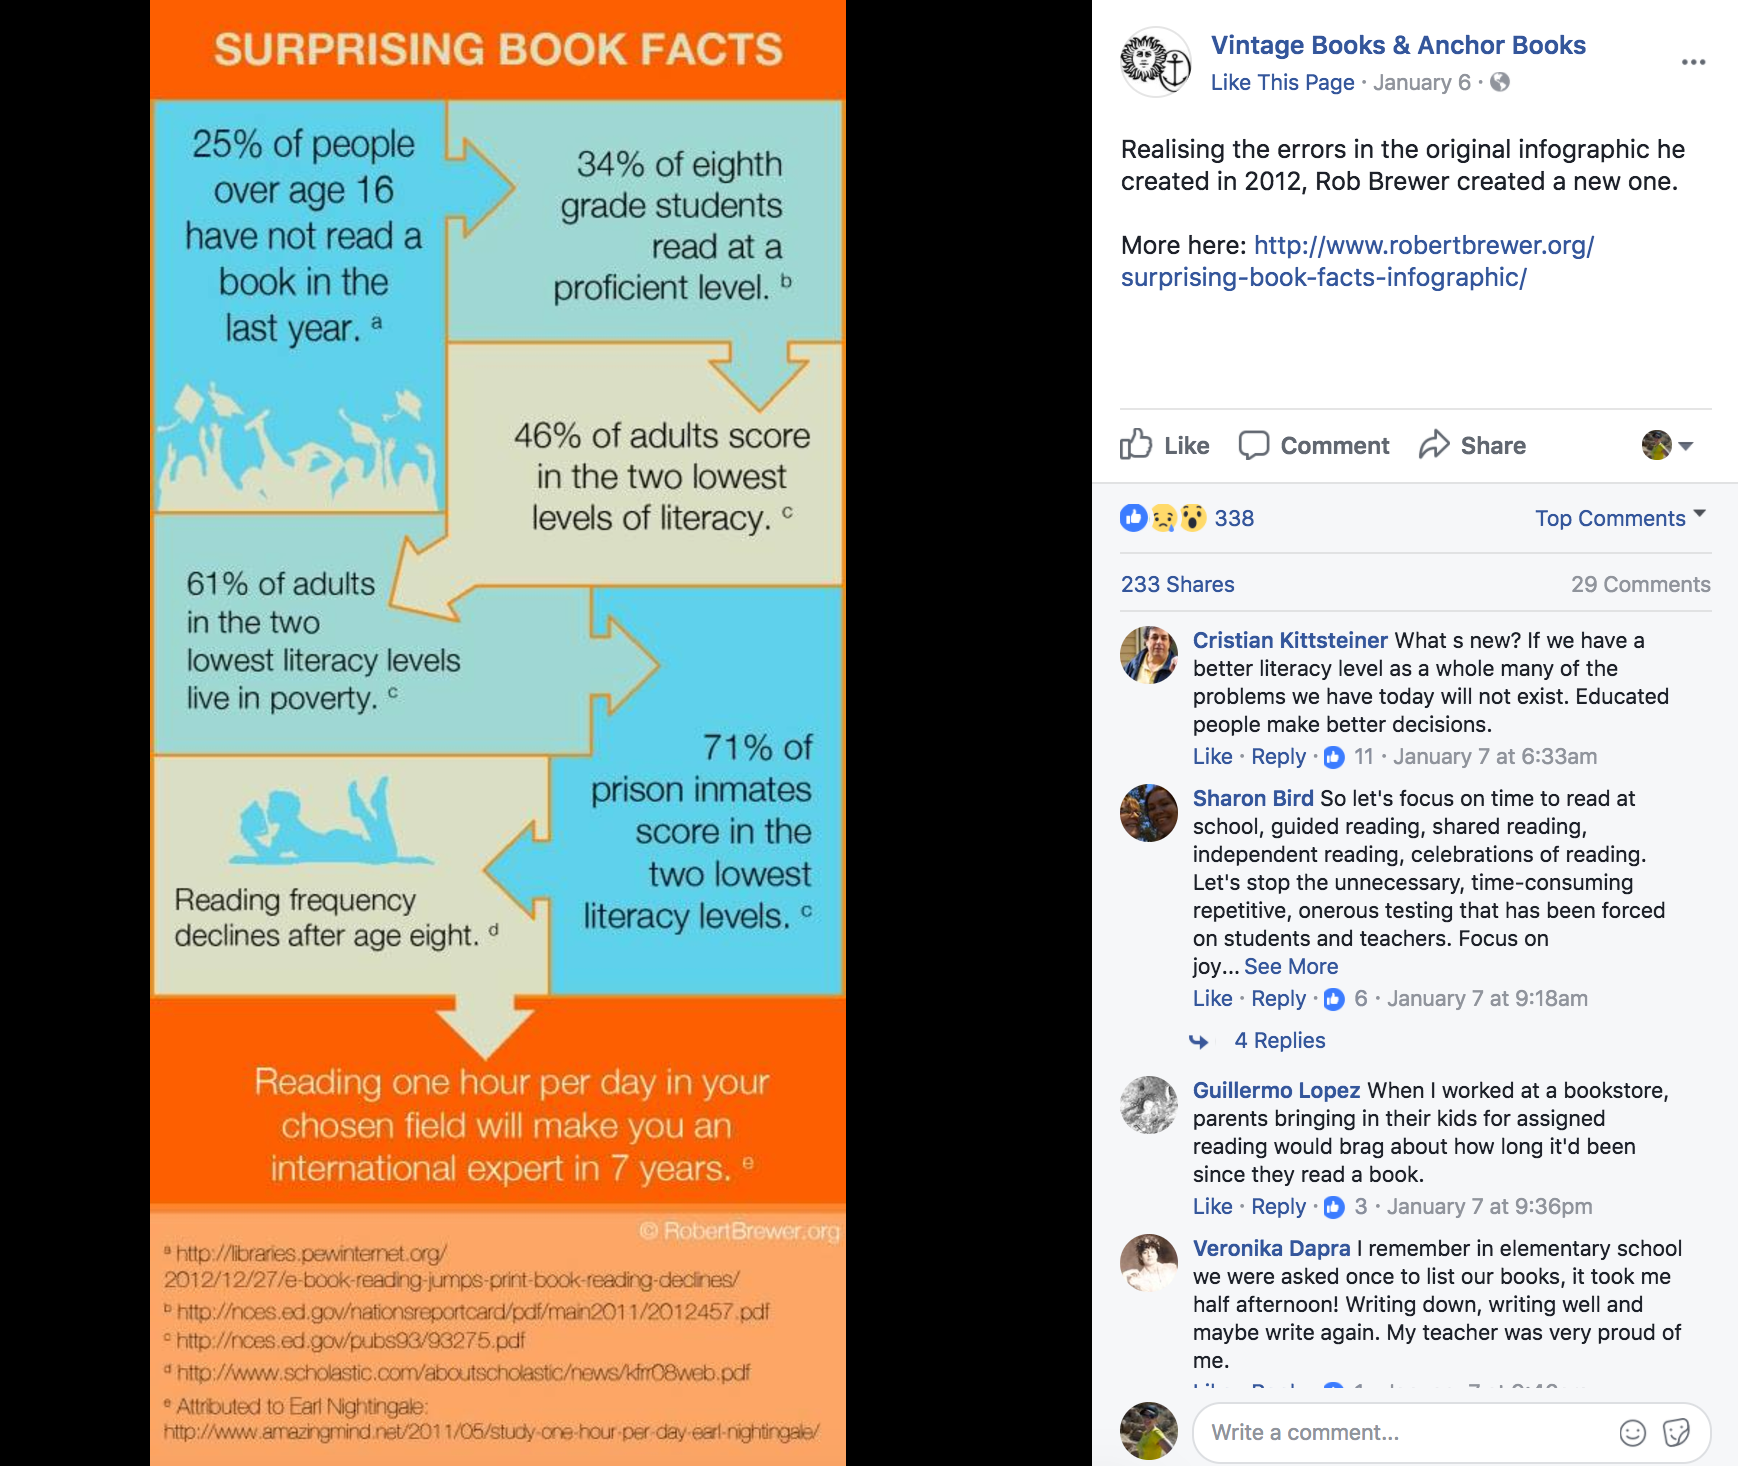 Viral content tip - you can educate people about facts